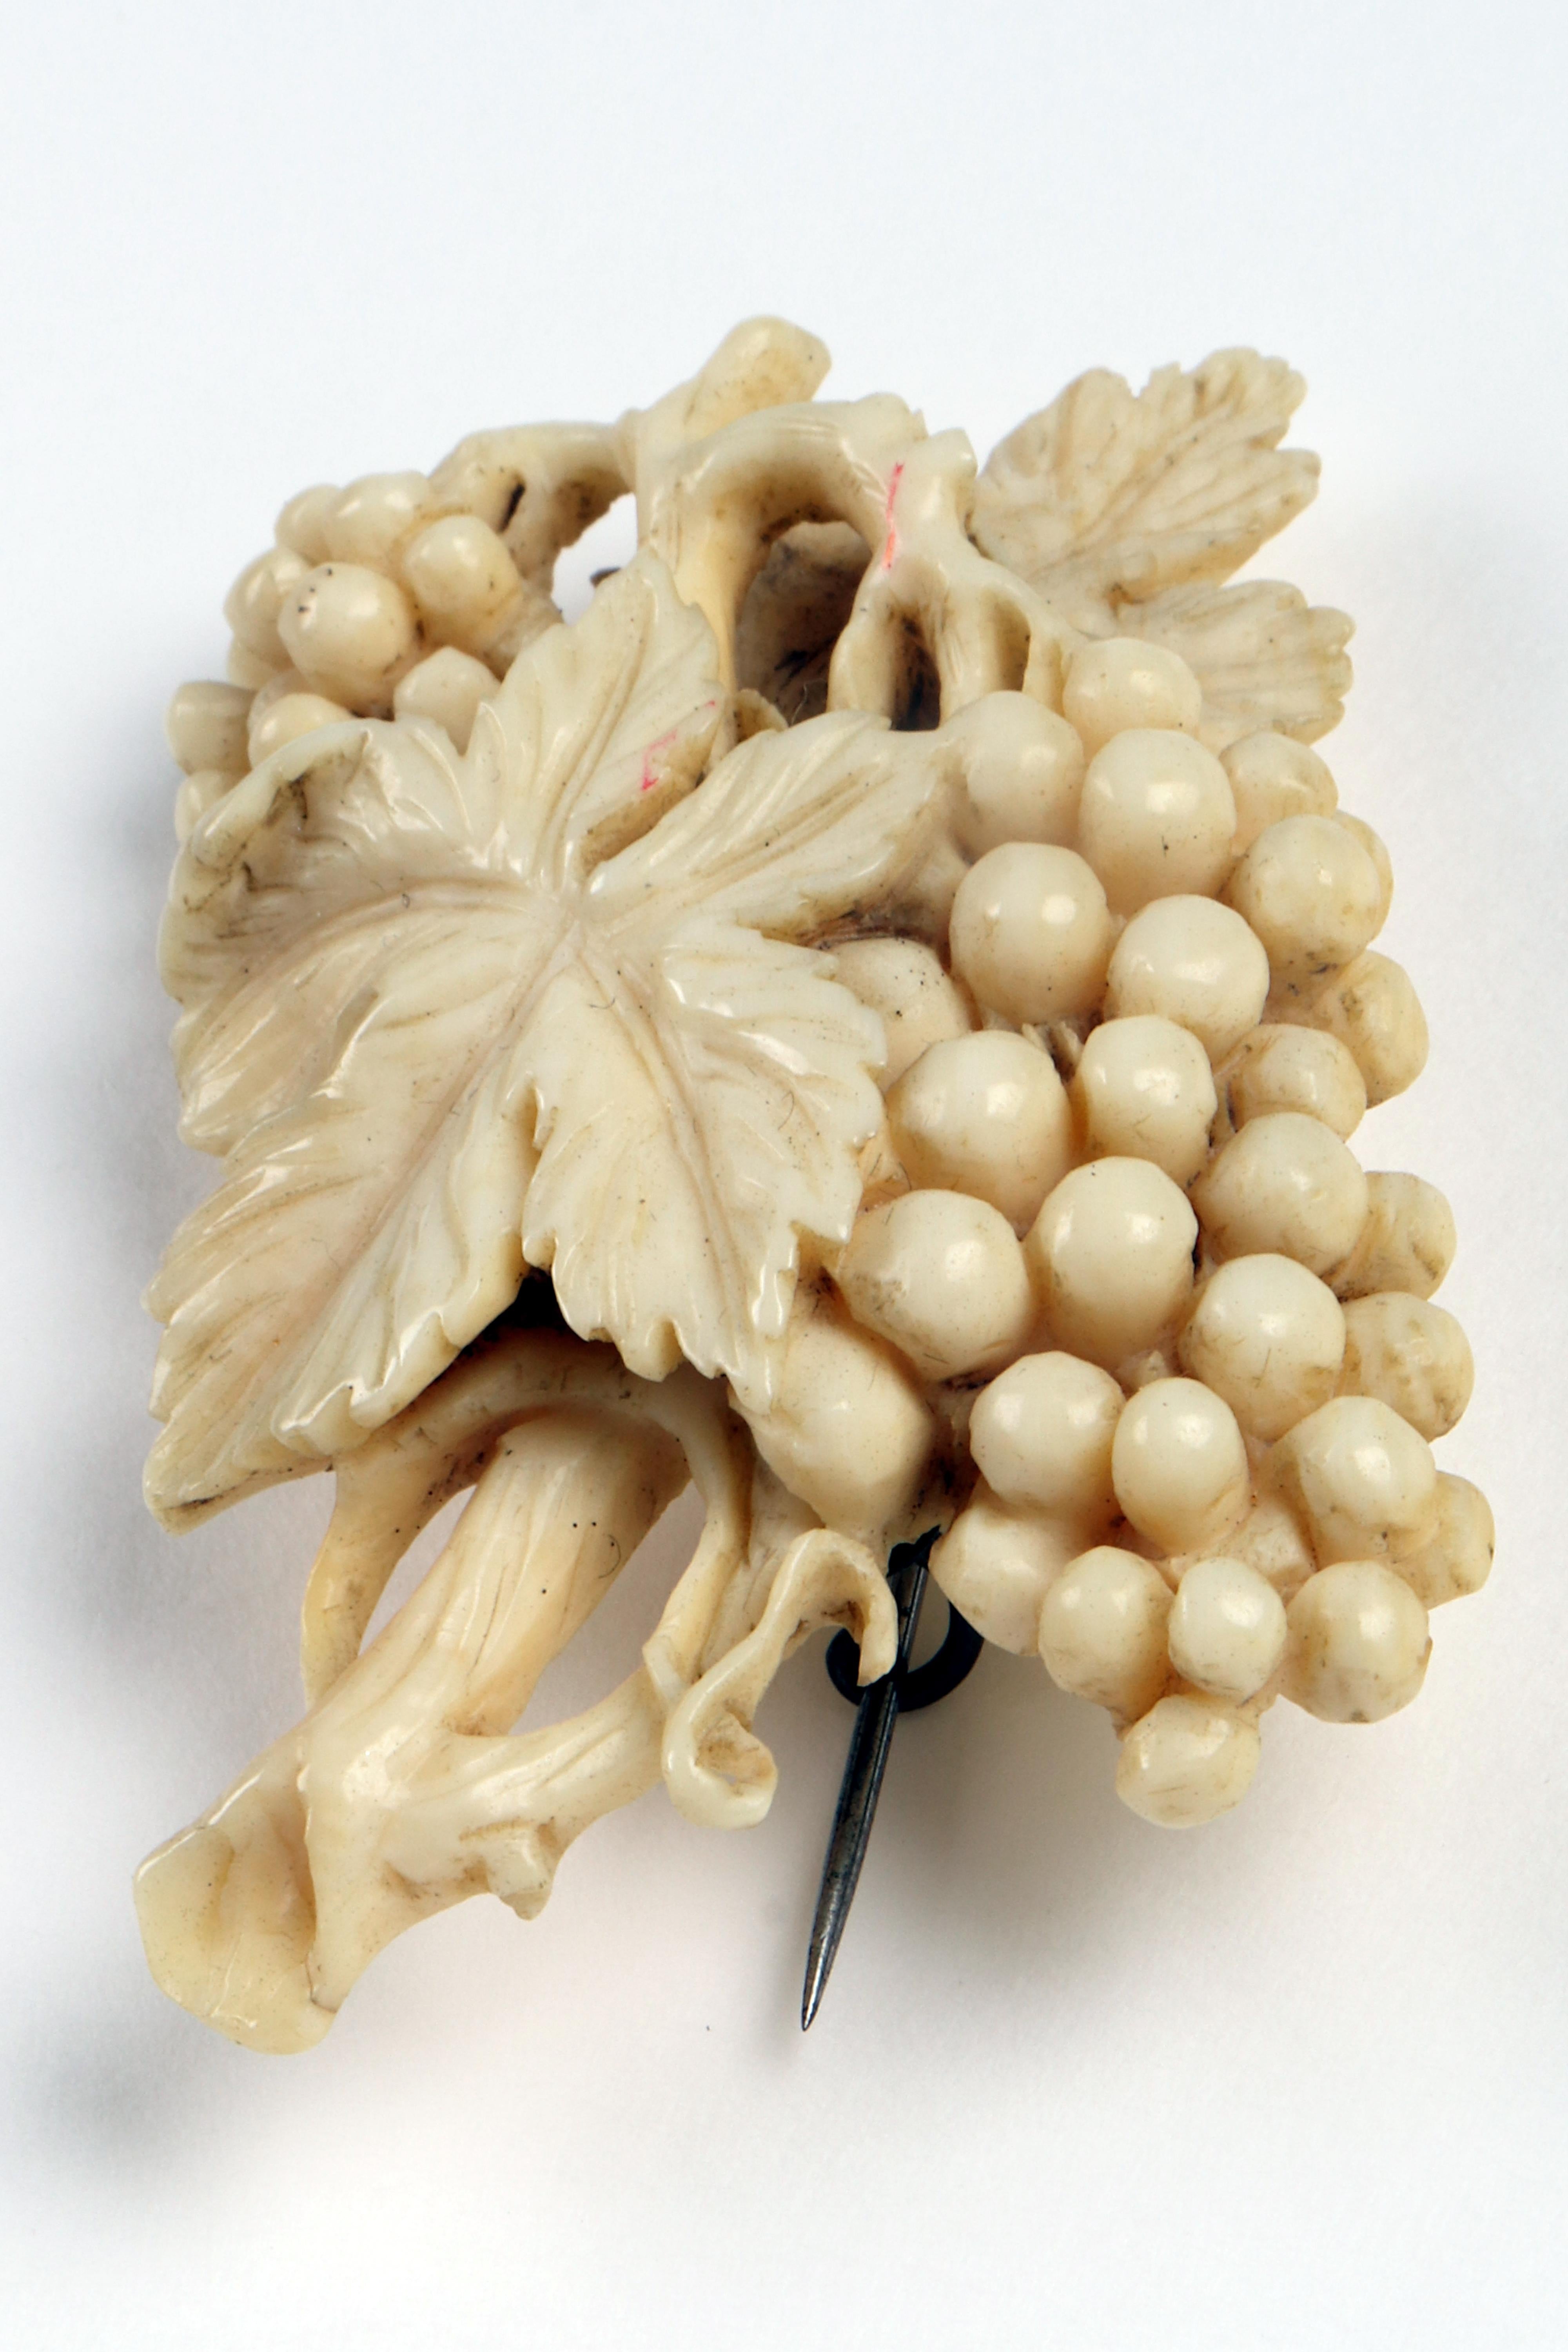 Ivory A brooch made of ivory depicting bunches of grapes, England 1890. For Sale